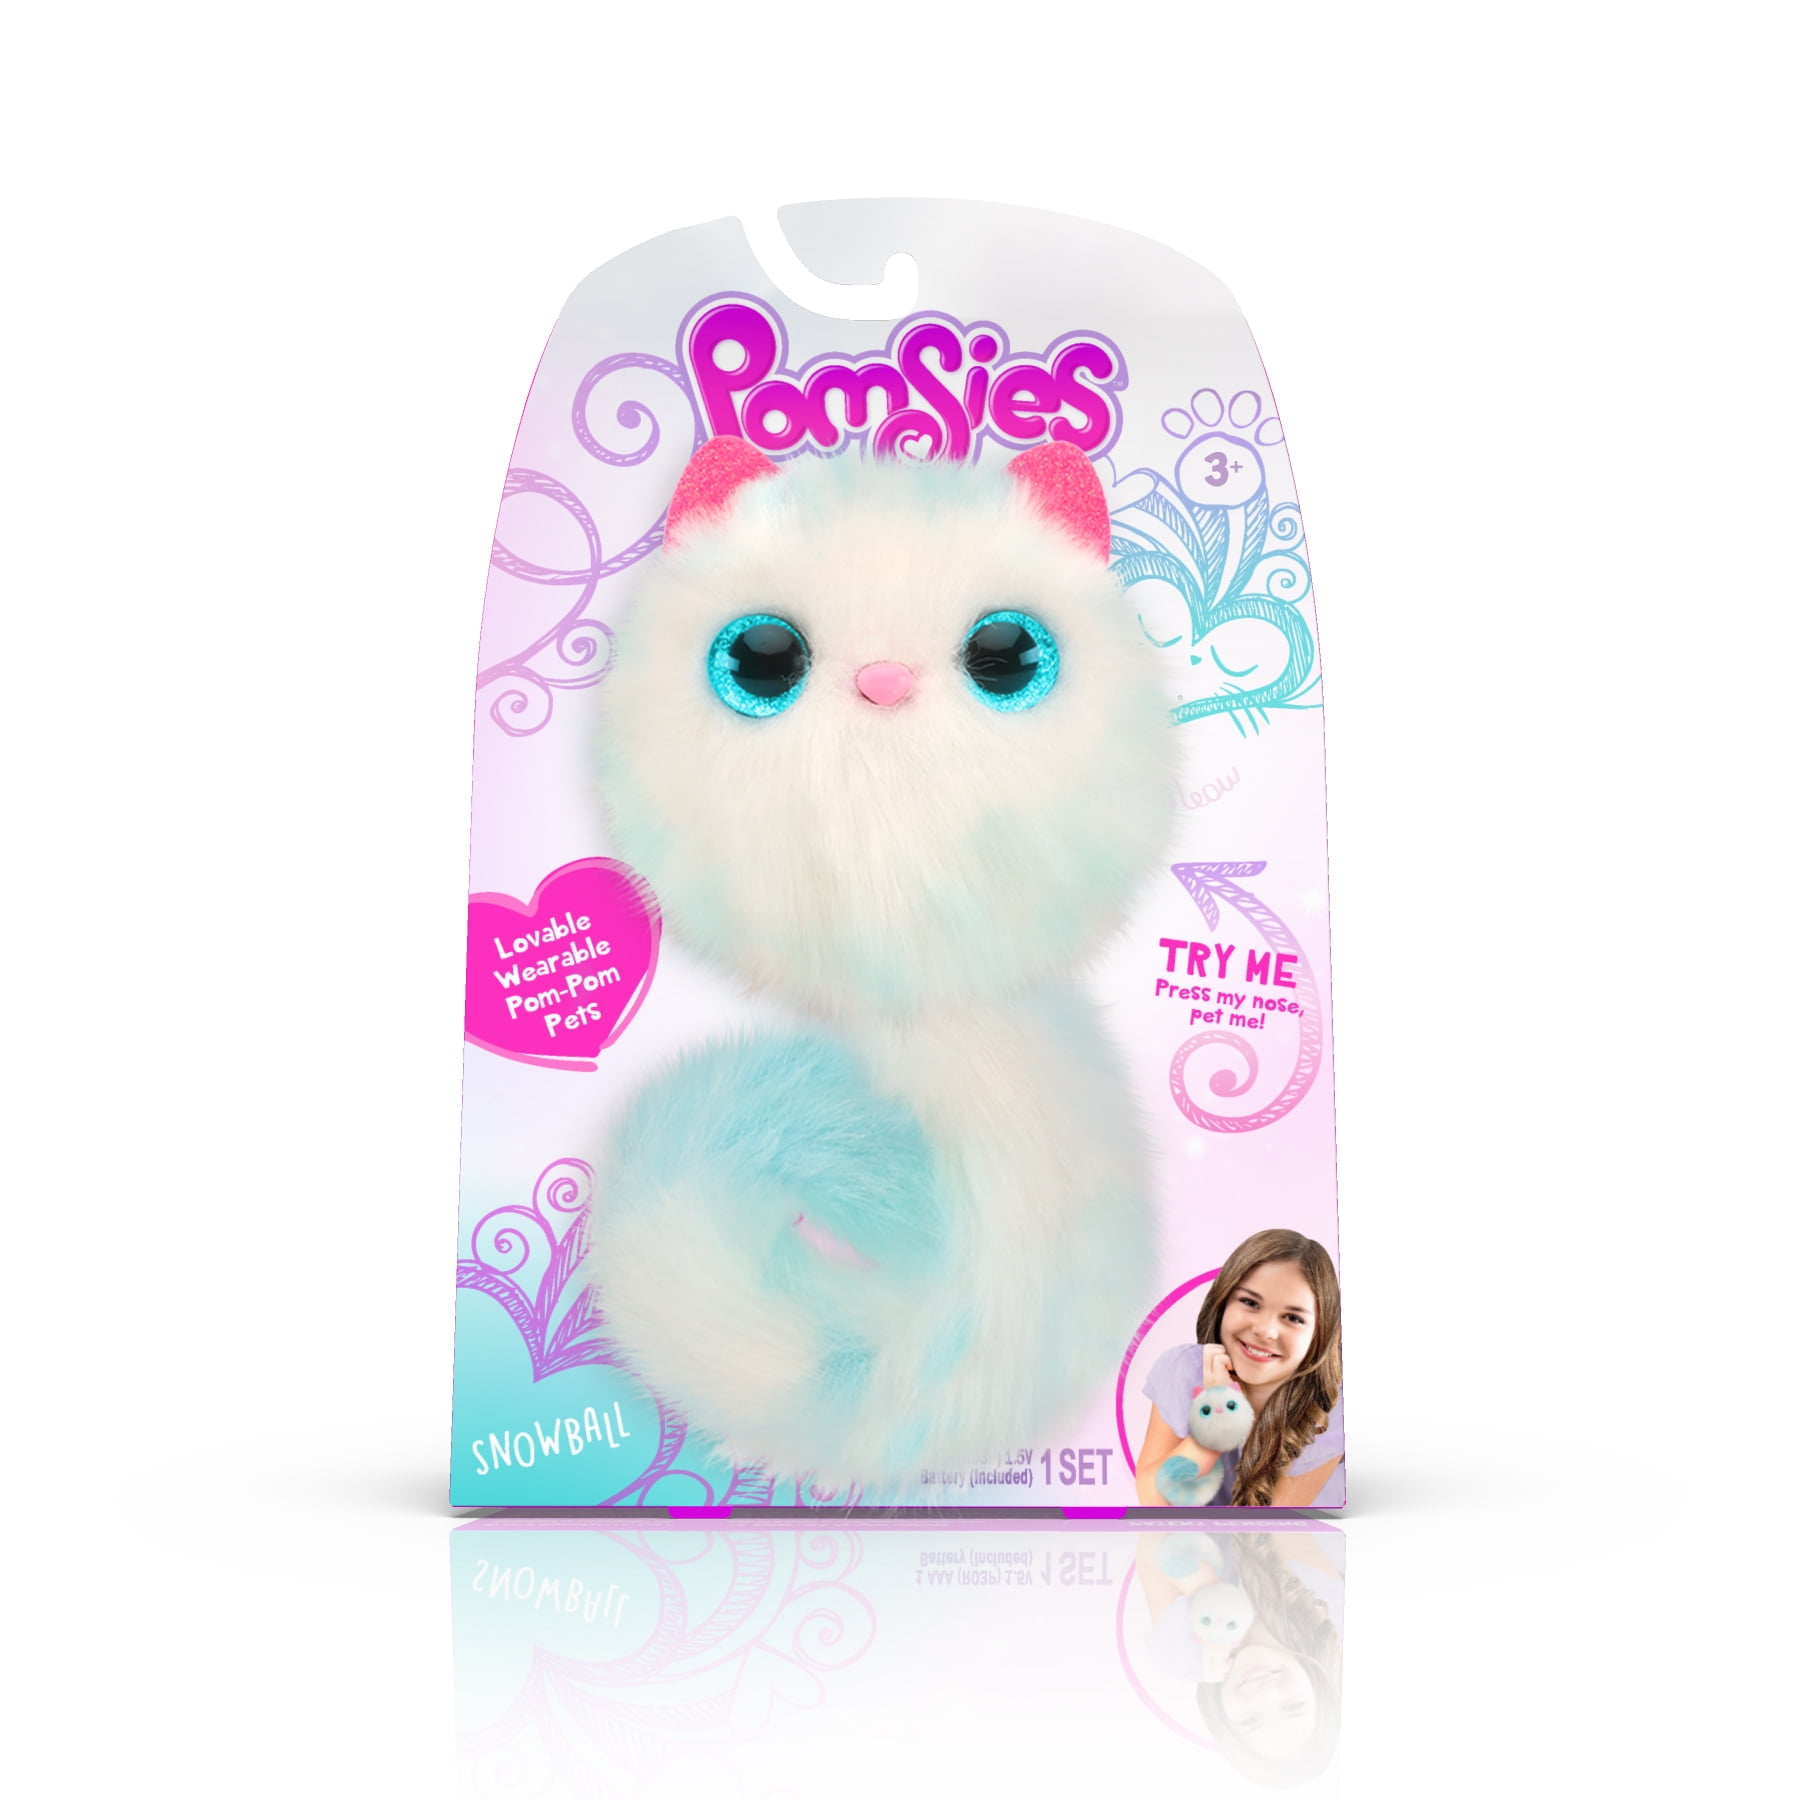 Pomsies Pet Lulu Plush Interactive Toy Lovable Wearable Pom-Pom Pets Makes Noise 